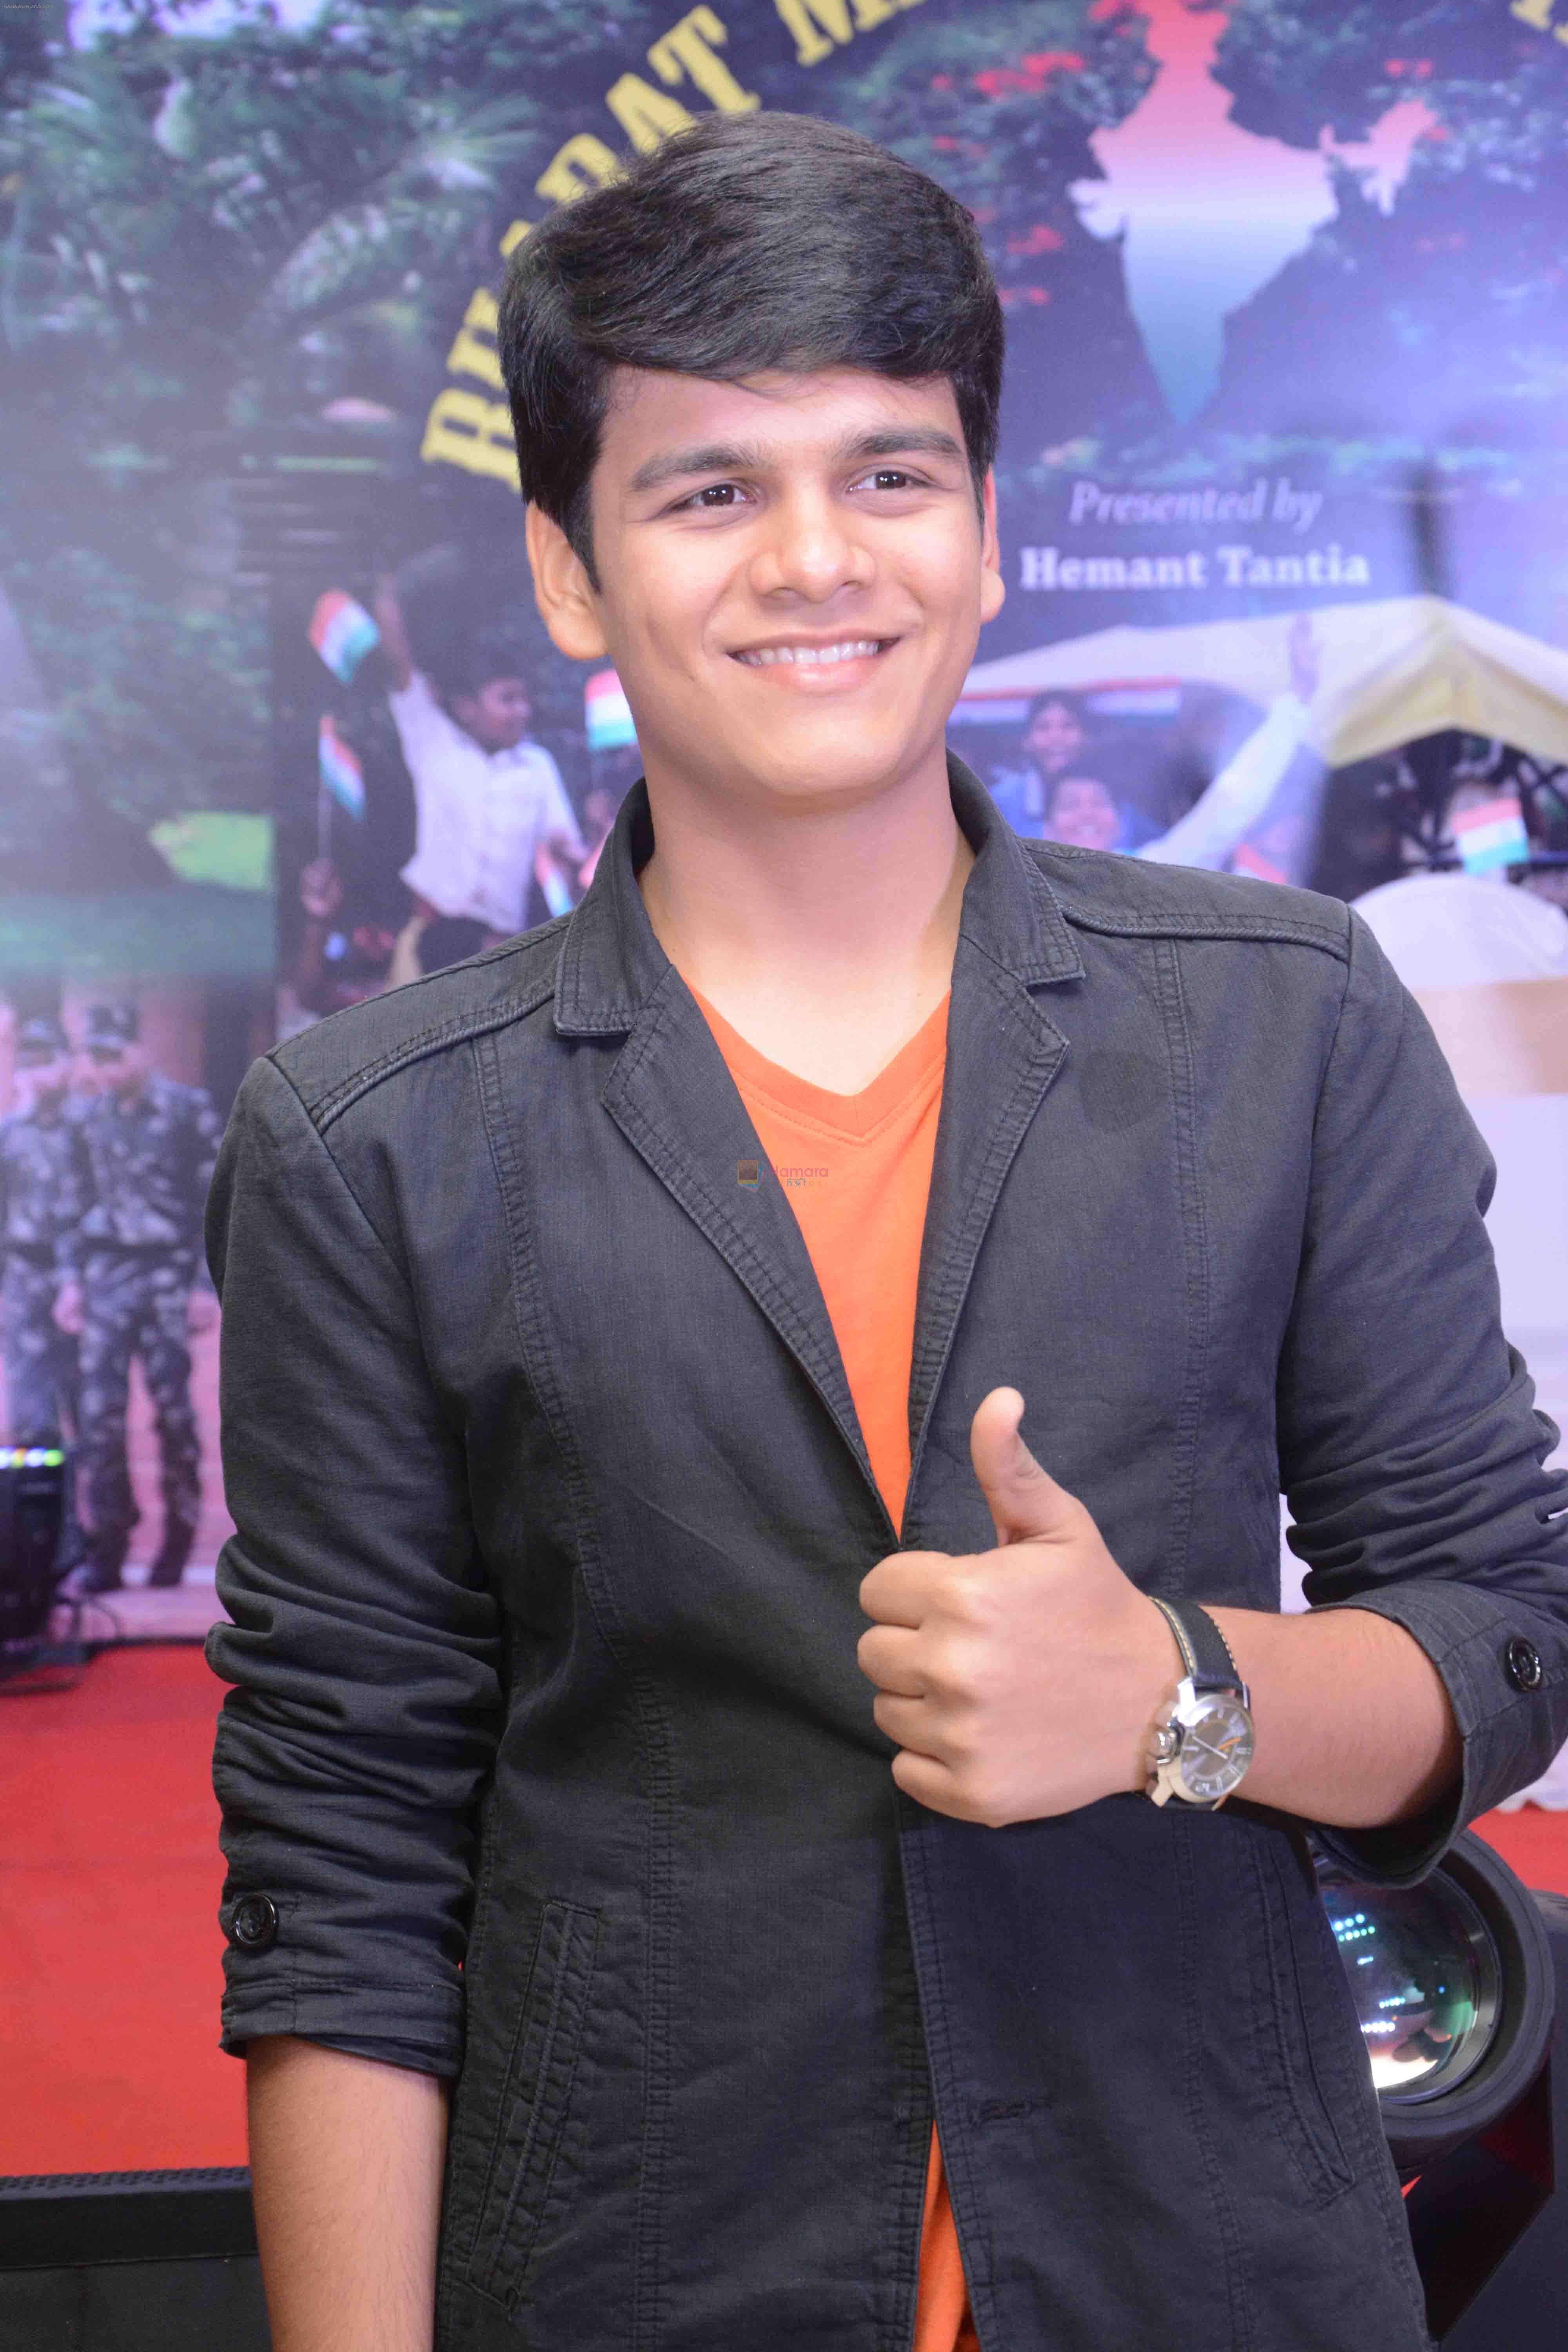 Bhavya Gandhi attend Hemant Tantia song launch for Republic Day